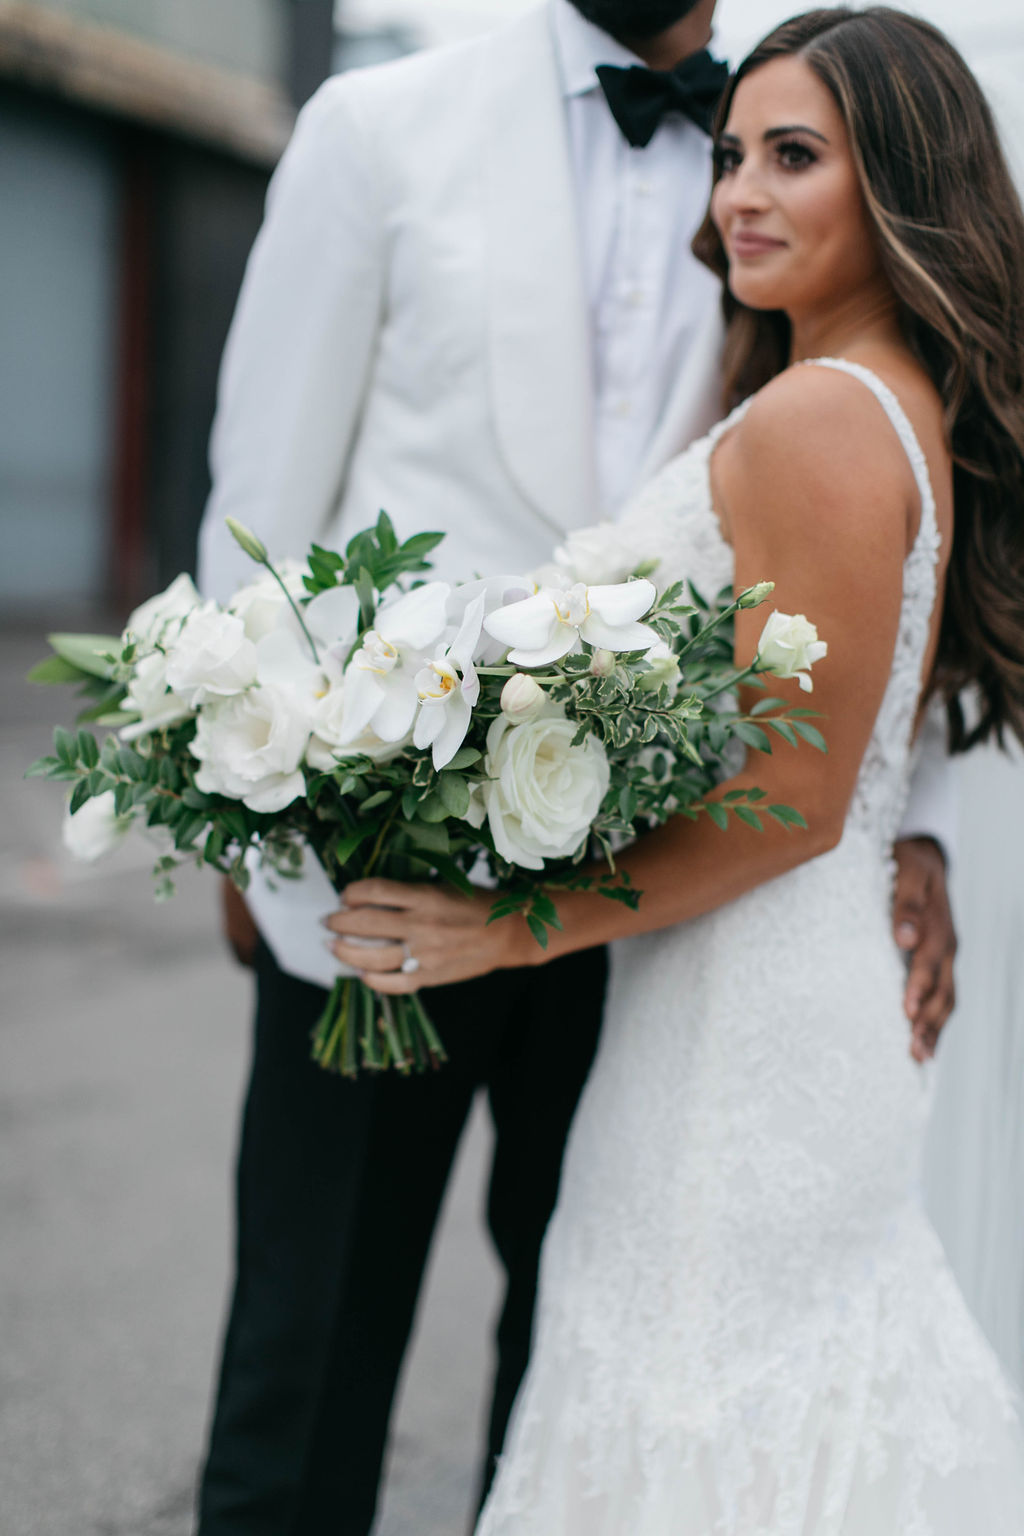 Bride holding bouquet of white phaleanopsis orchids, white roses, white lisianthus and greenery